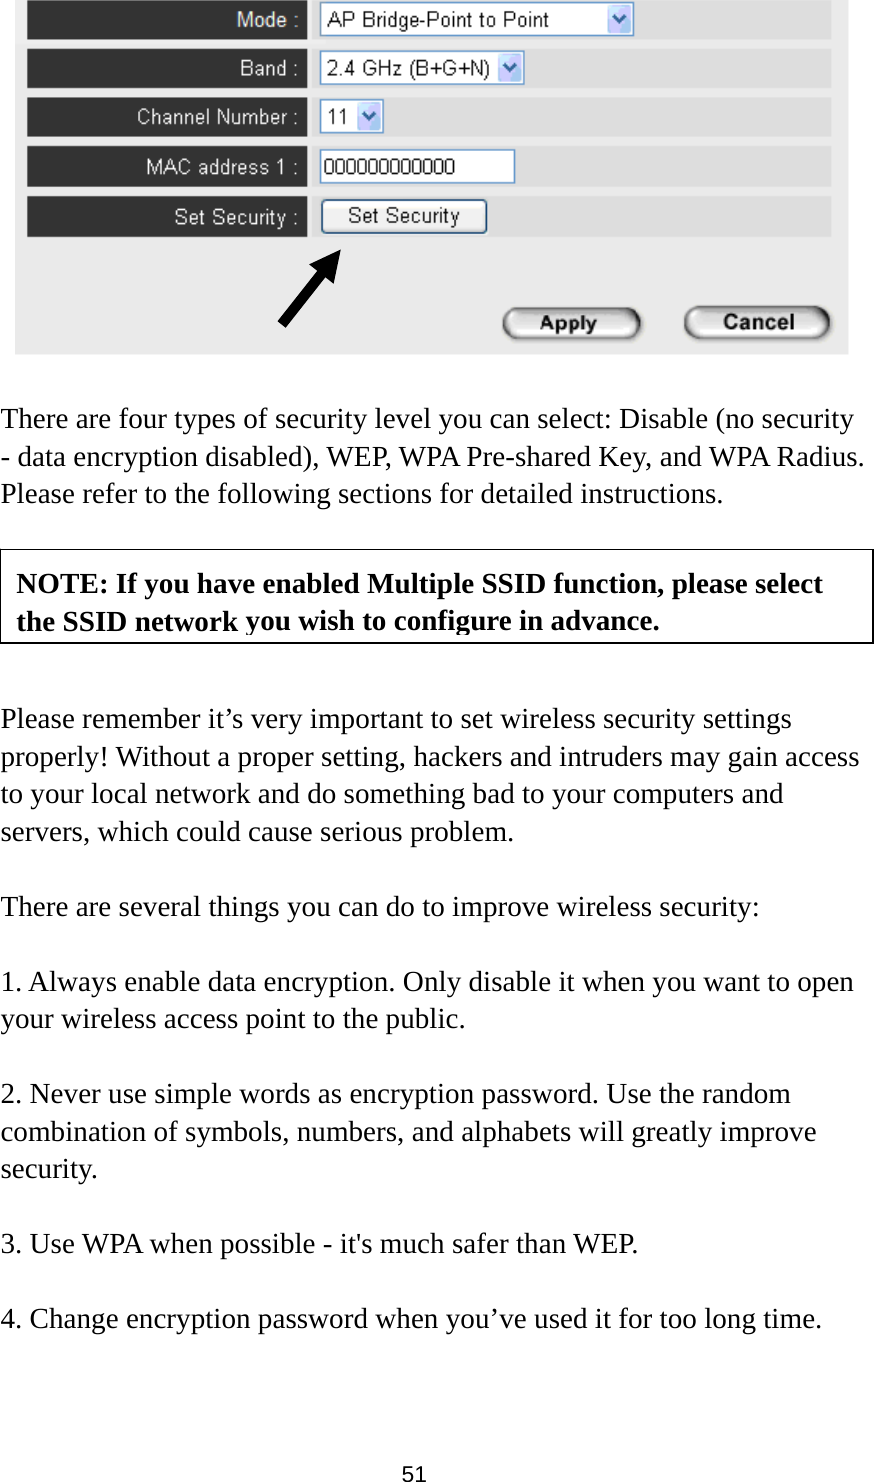 51     There are four types of security level you can select: Disable (no security - data encryption disabled), WEP, WPA Pre-shared Key, and WPA Radius. Please refer to the following sections for detailed instructions.      Please remember it’s very important to set wireless security settings properly! Without a proper setting, hackers and intruders may gain access to your local network and do something bad to your computers and servers, which could cause serious problem.    There are several things you can do to improve wireless security:  1. Always enable data encryption. Only disable it when you want to open your wireless access point to the public.  2. Never use simple words as encryption password. Use the random combination of symbols, numbers, and alphabets will greatly improve security.  3. Use WPA when possible - it&apos;s much safer than WEP.  4. Change encryption password when you’ve used it for too long time. NOTE: If you have enabled Multiple SSID function, please select the SSID network you wish to configure in advance.